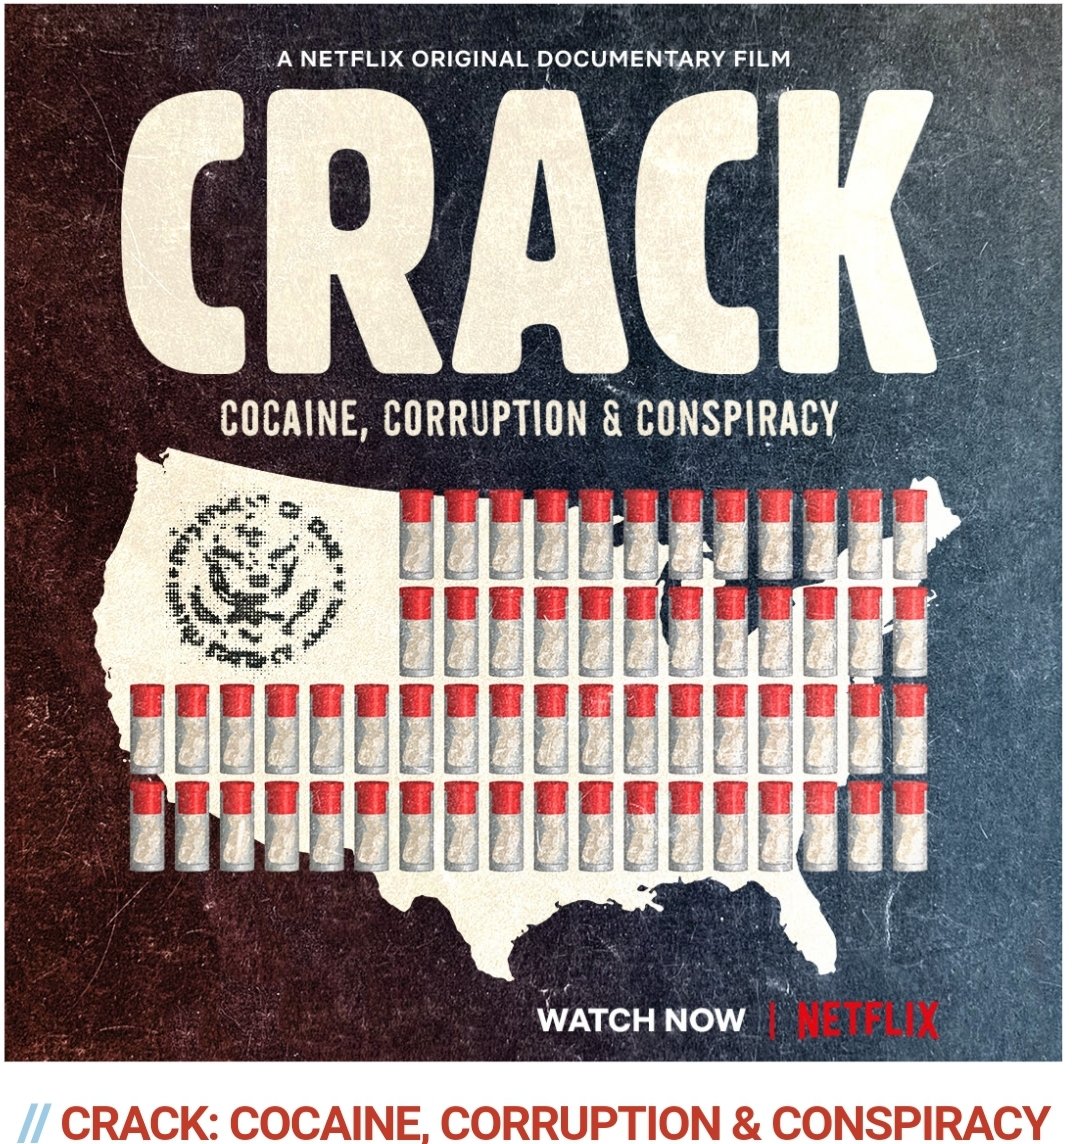 Now Streaming @NetflixFilm
Crack: Cocaine, Corruption & Conspiracy.
Award-winning doc filmmaker @StanleyNelson1 is back!.

In the early 1980s, the crack epidemic tore through America’s inner cities like a tsunami, ravaging all in its wake. 

https://t.co/DSdrcyAob1 https://t.co/tttJk6m7ui